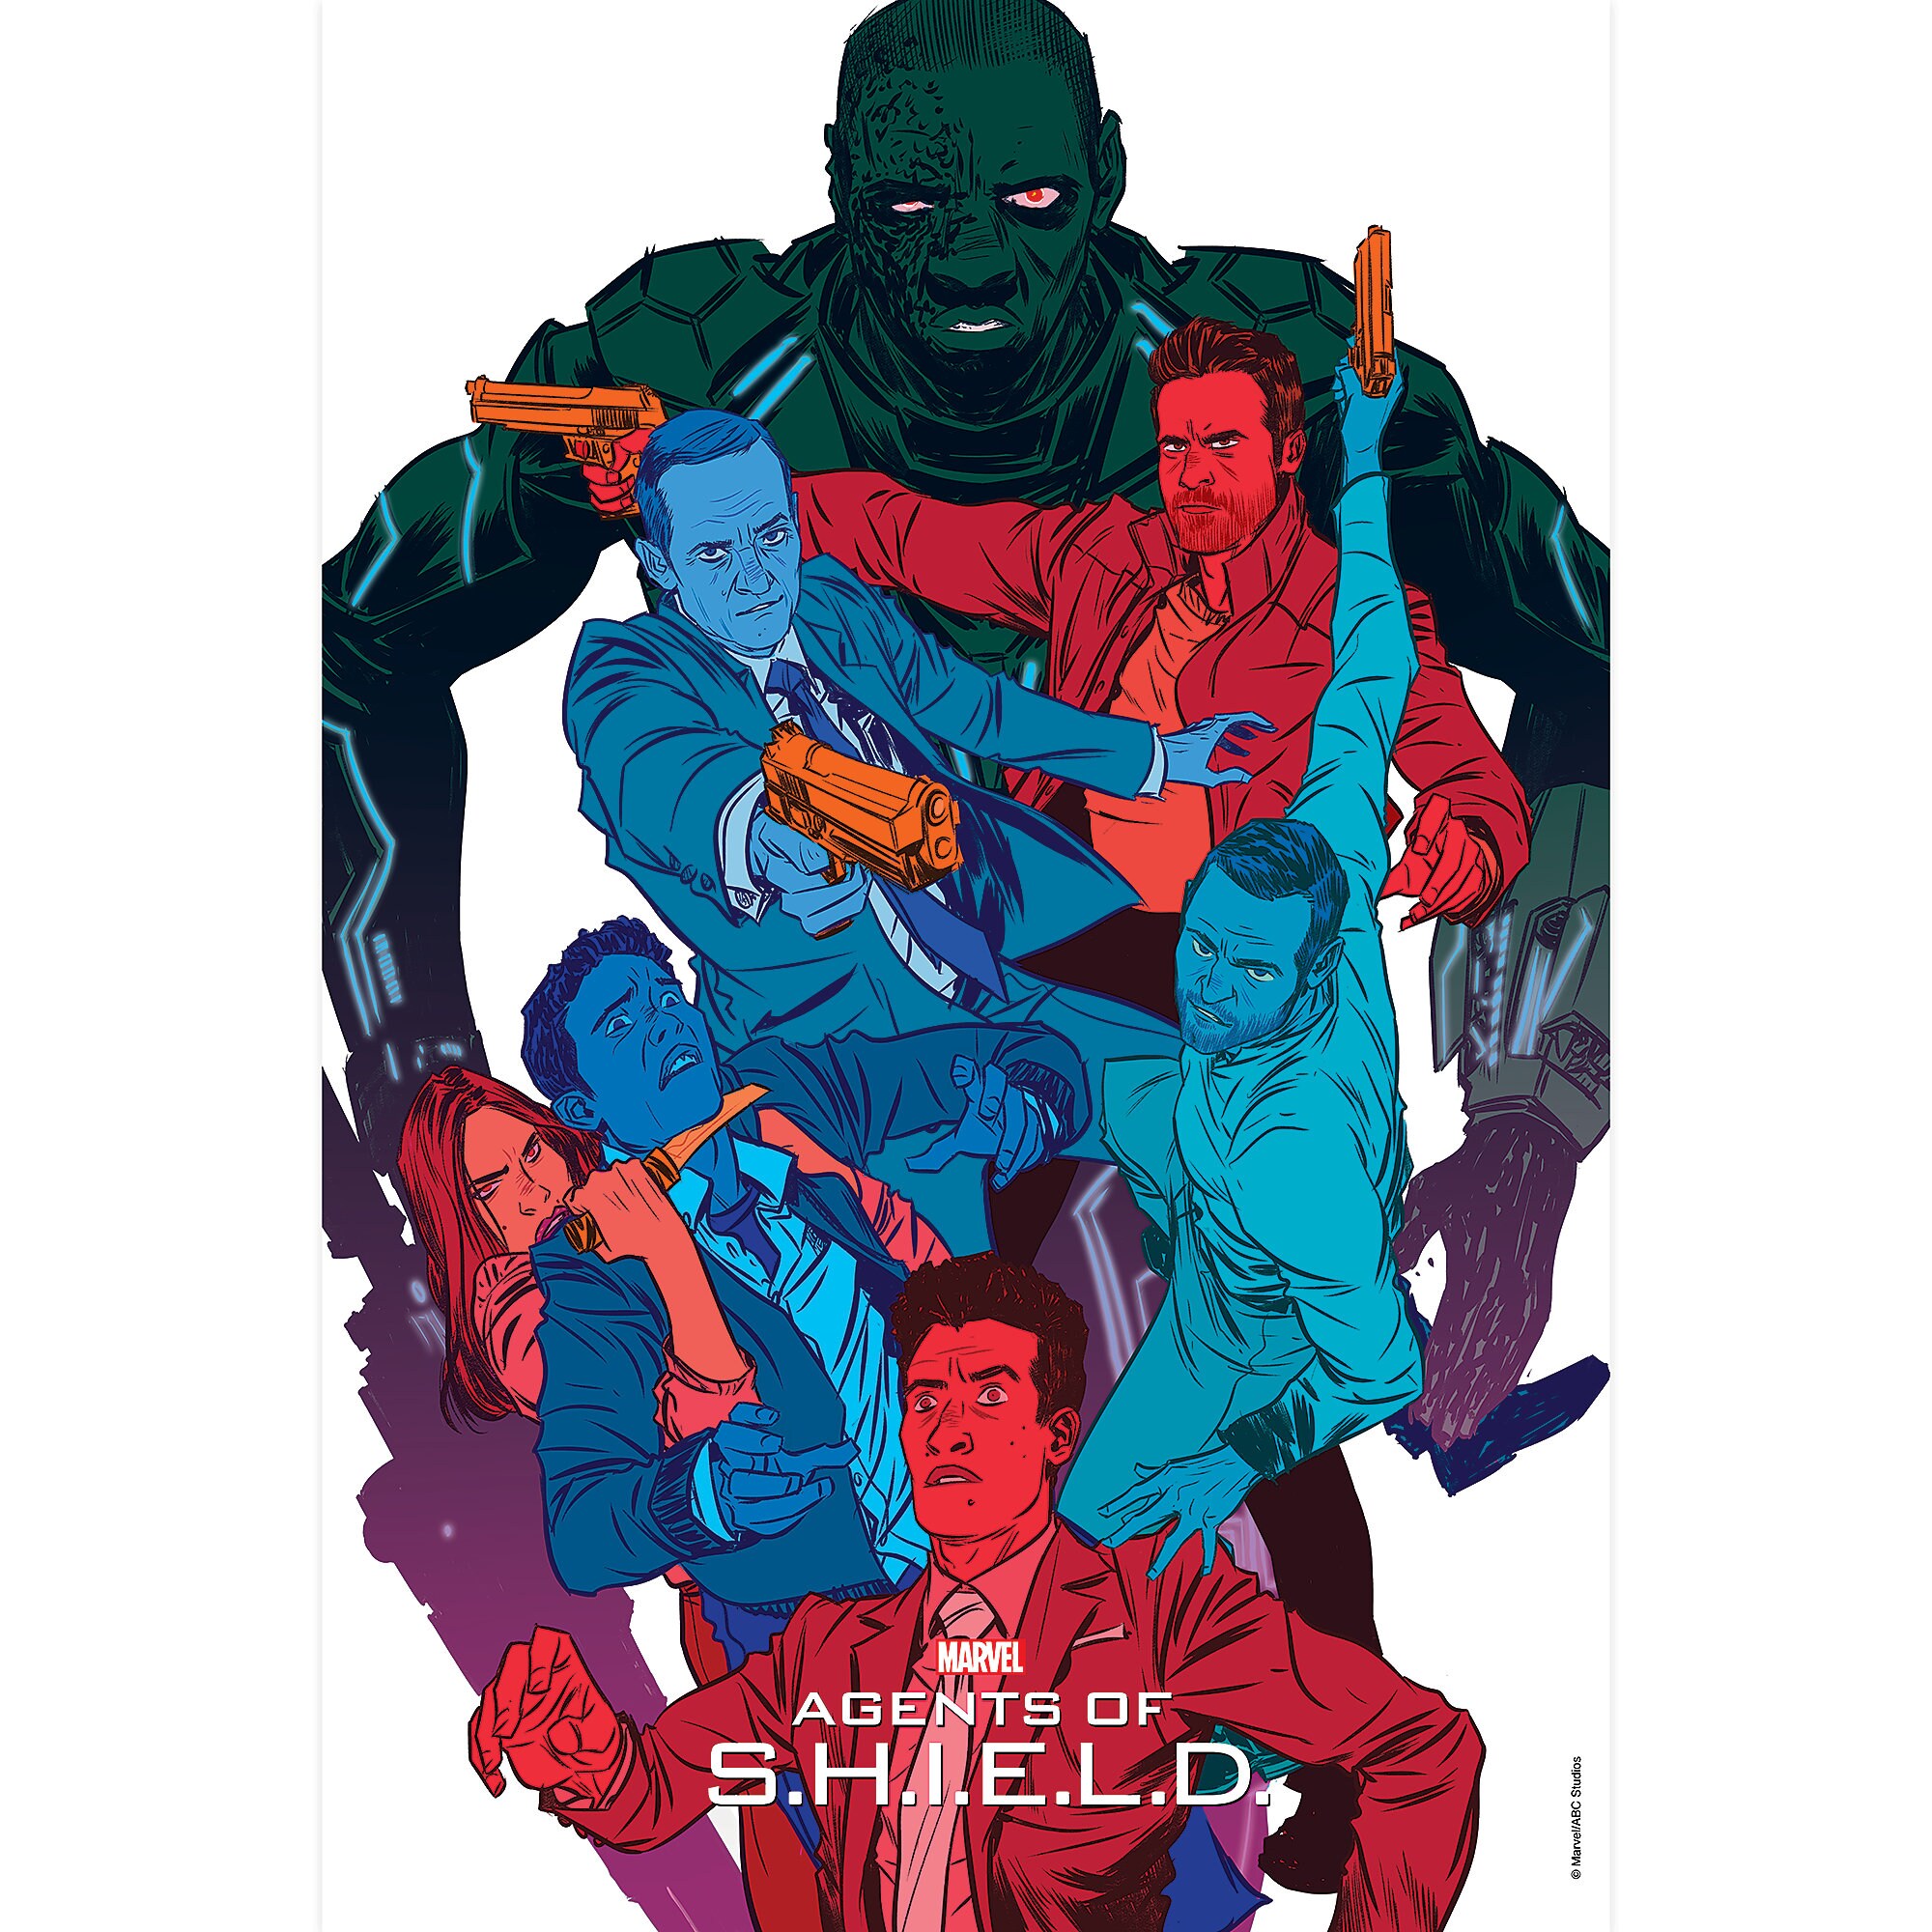 Marvel's Agents of S.H.I.E.L.D. ''The Frenemy of My Enemy'' Print - Limited Edition